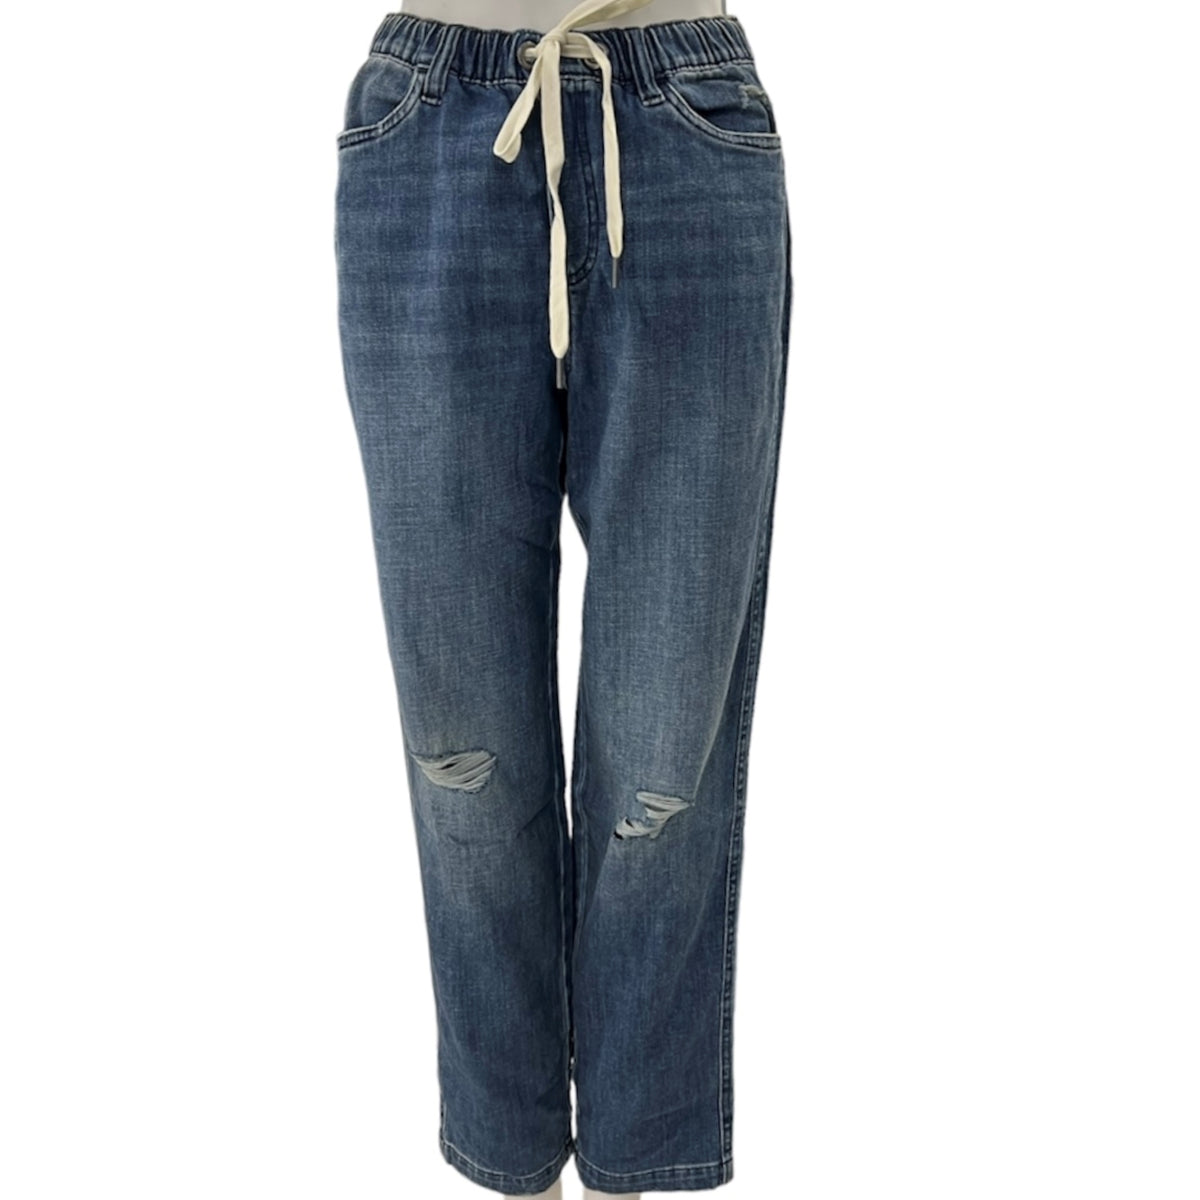 Aerie jeans American Eagle